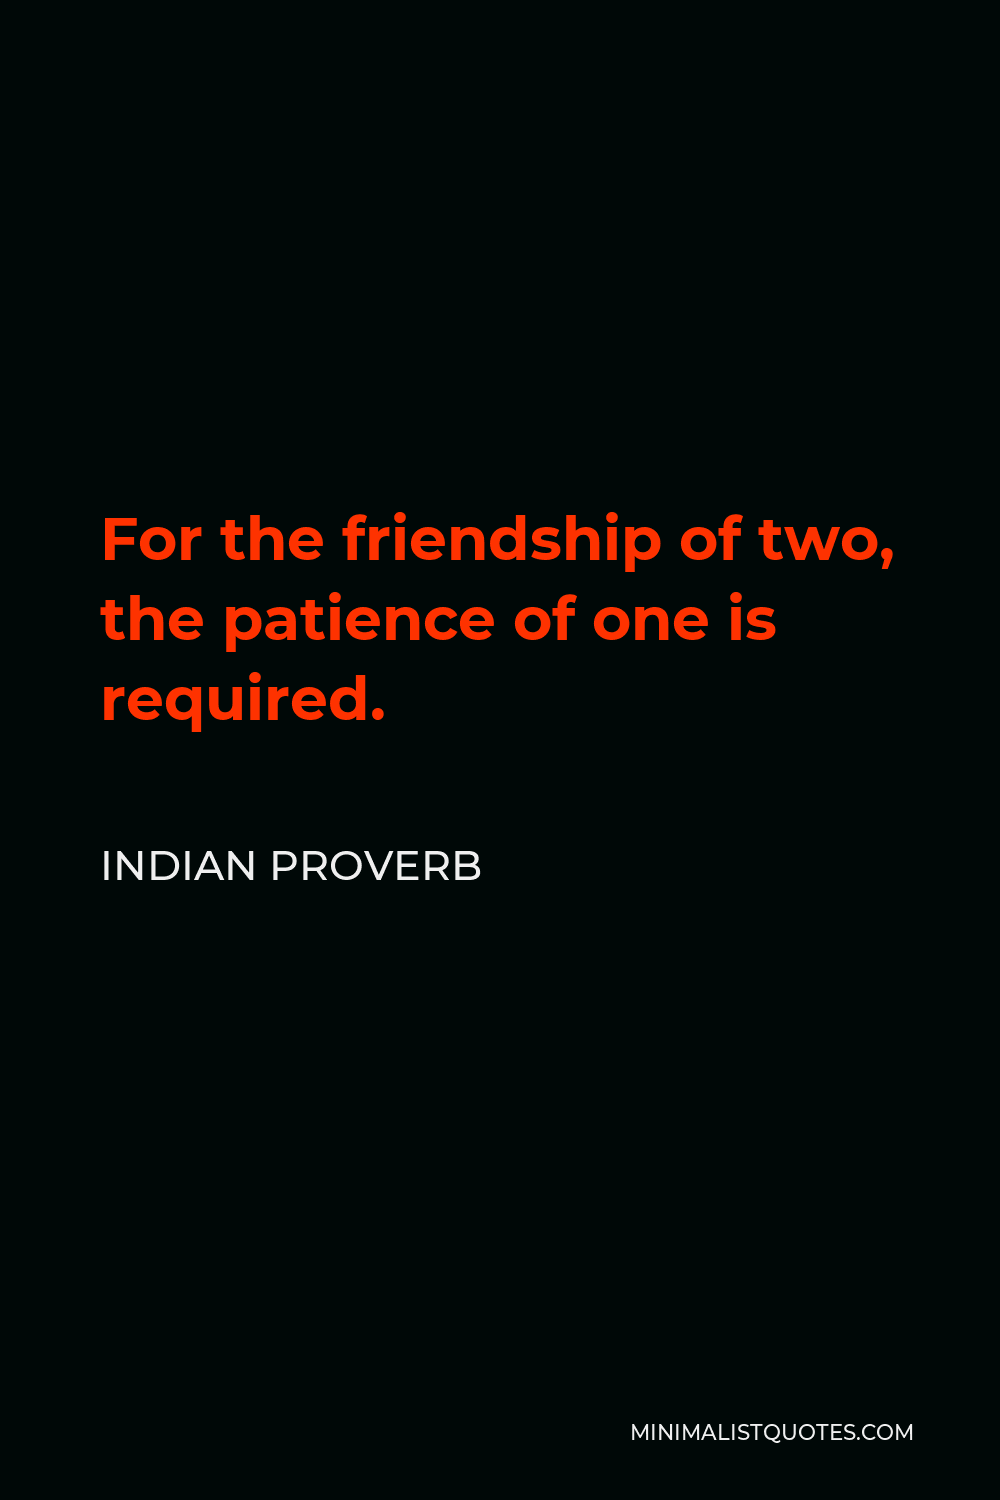 Indian Proverb Quote - For the friendship of two, the patience of one is required.